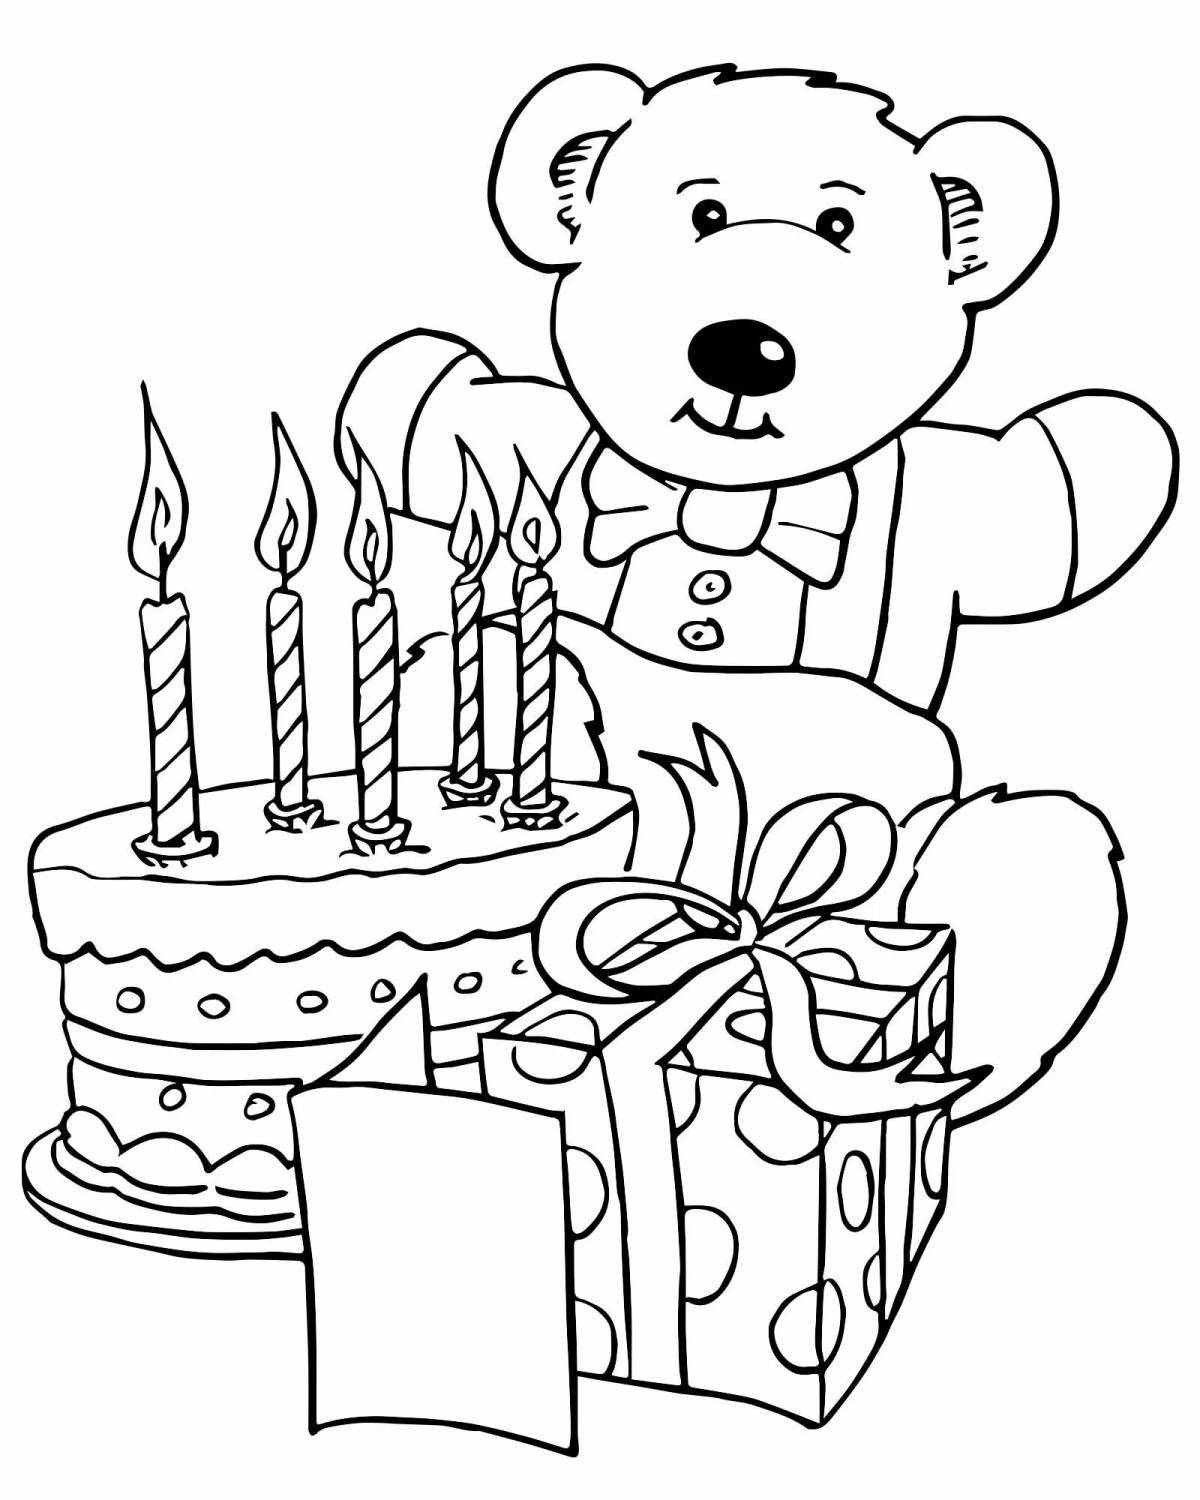 Brother's coloring book for his special day